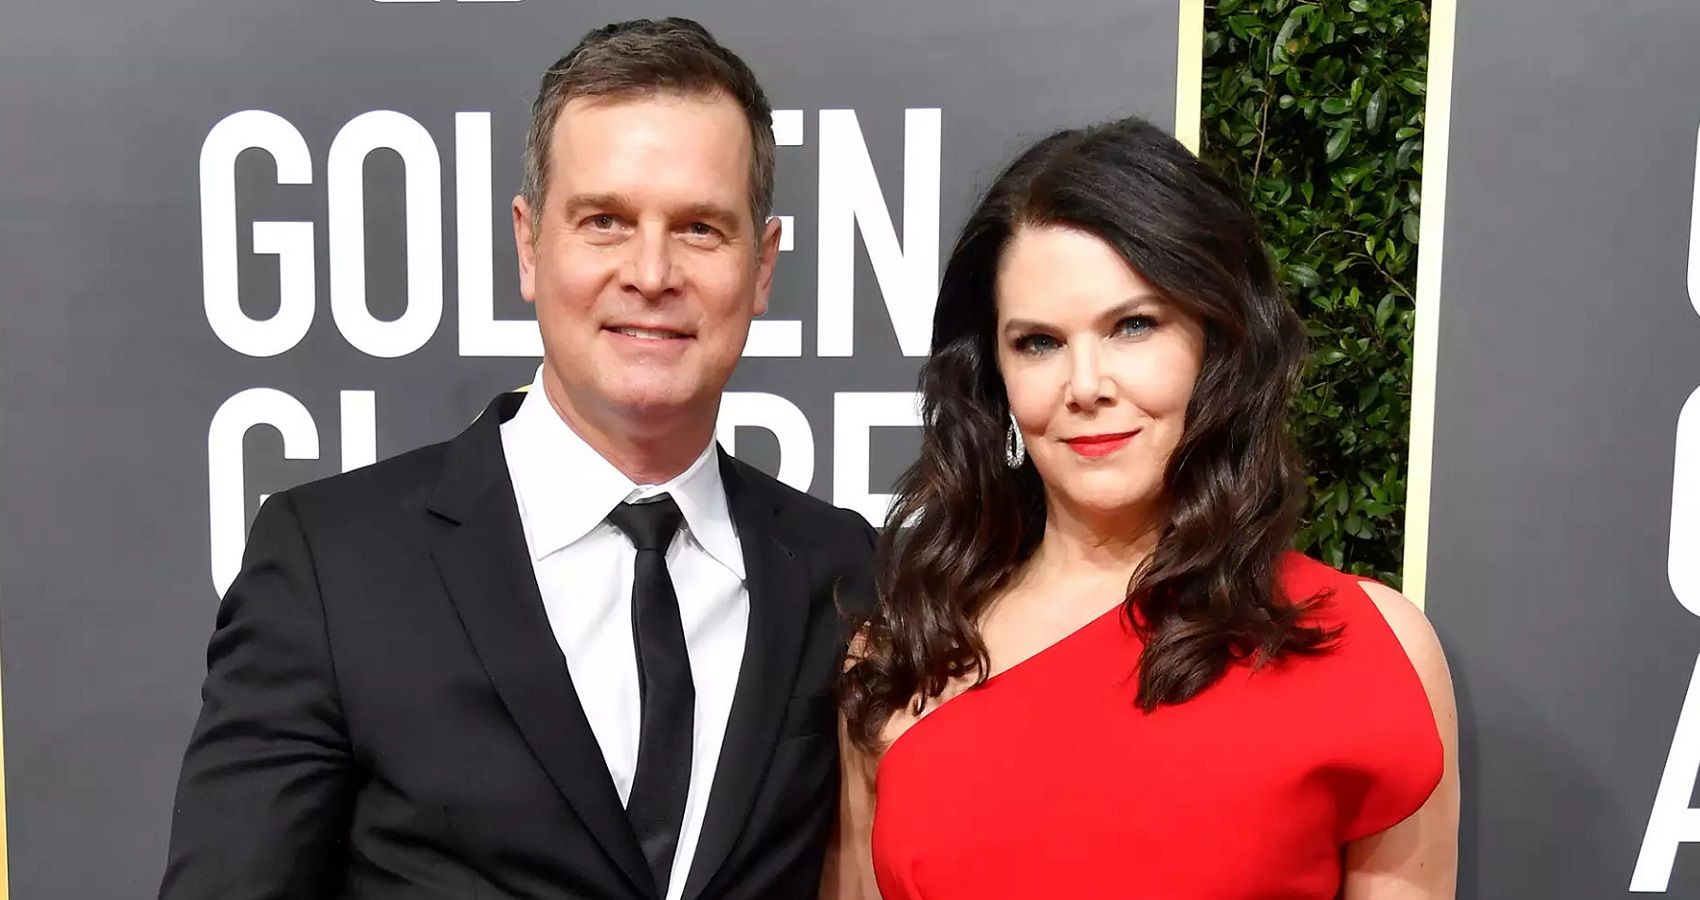 Lauren Graham and Peter Krause on the red carpet